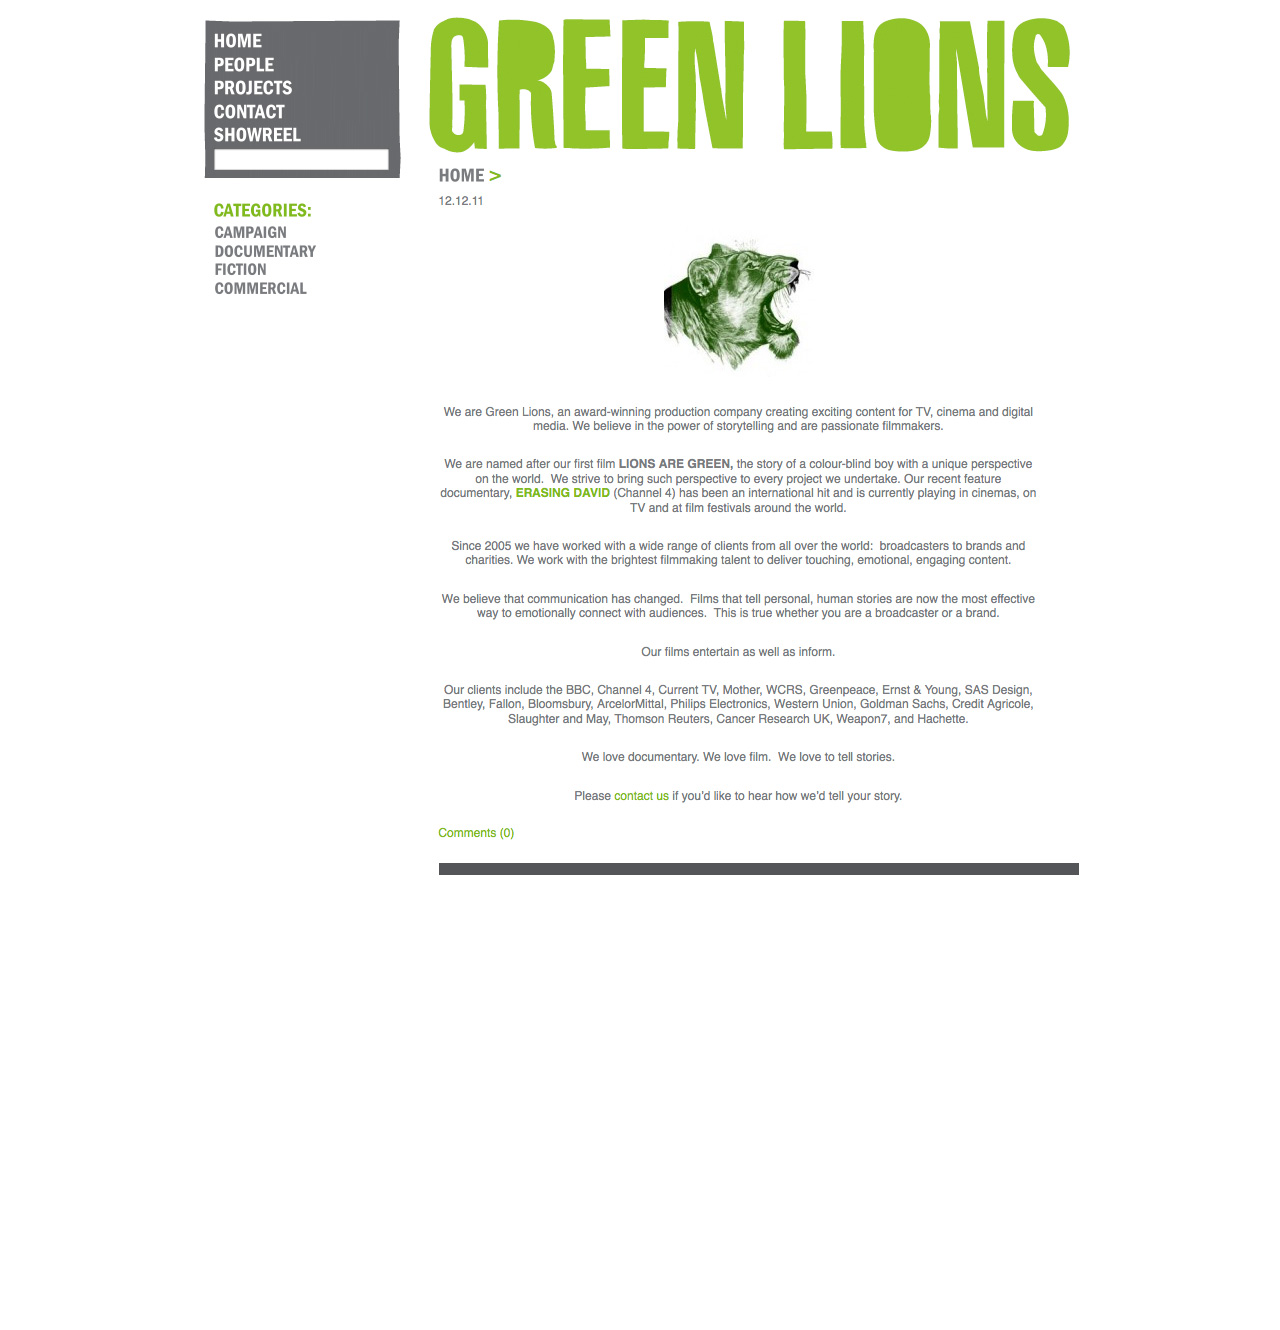 Green Lions homepage before the re-design